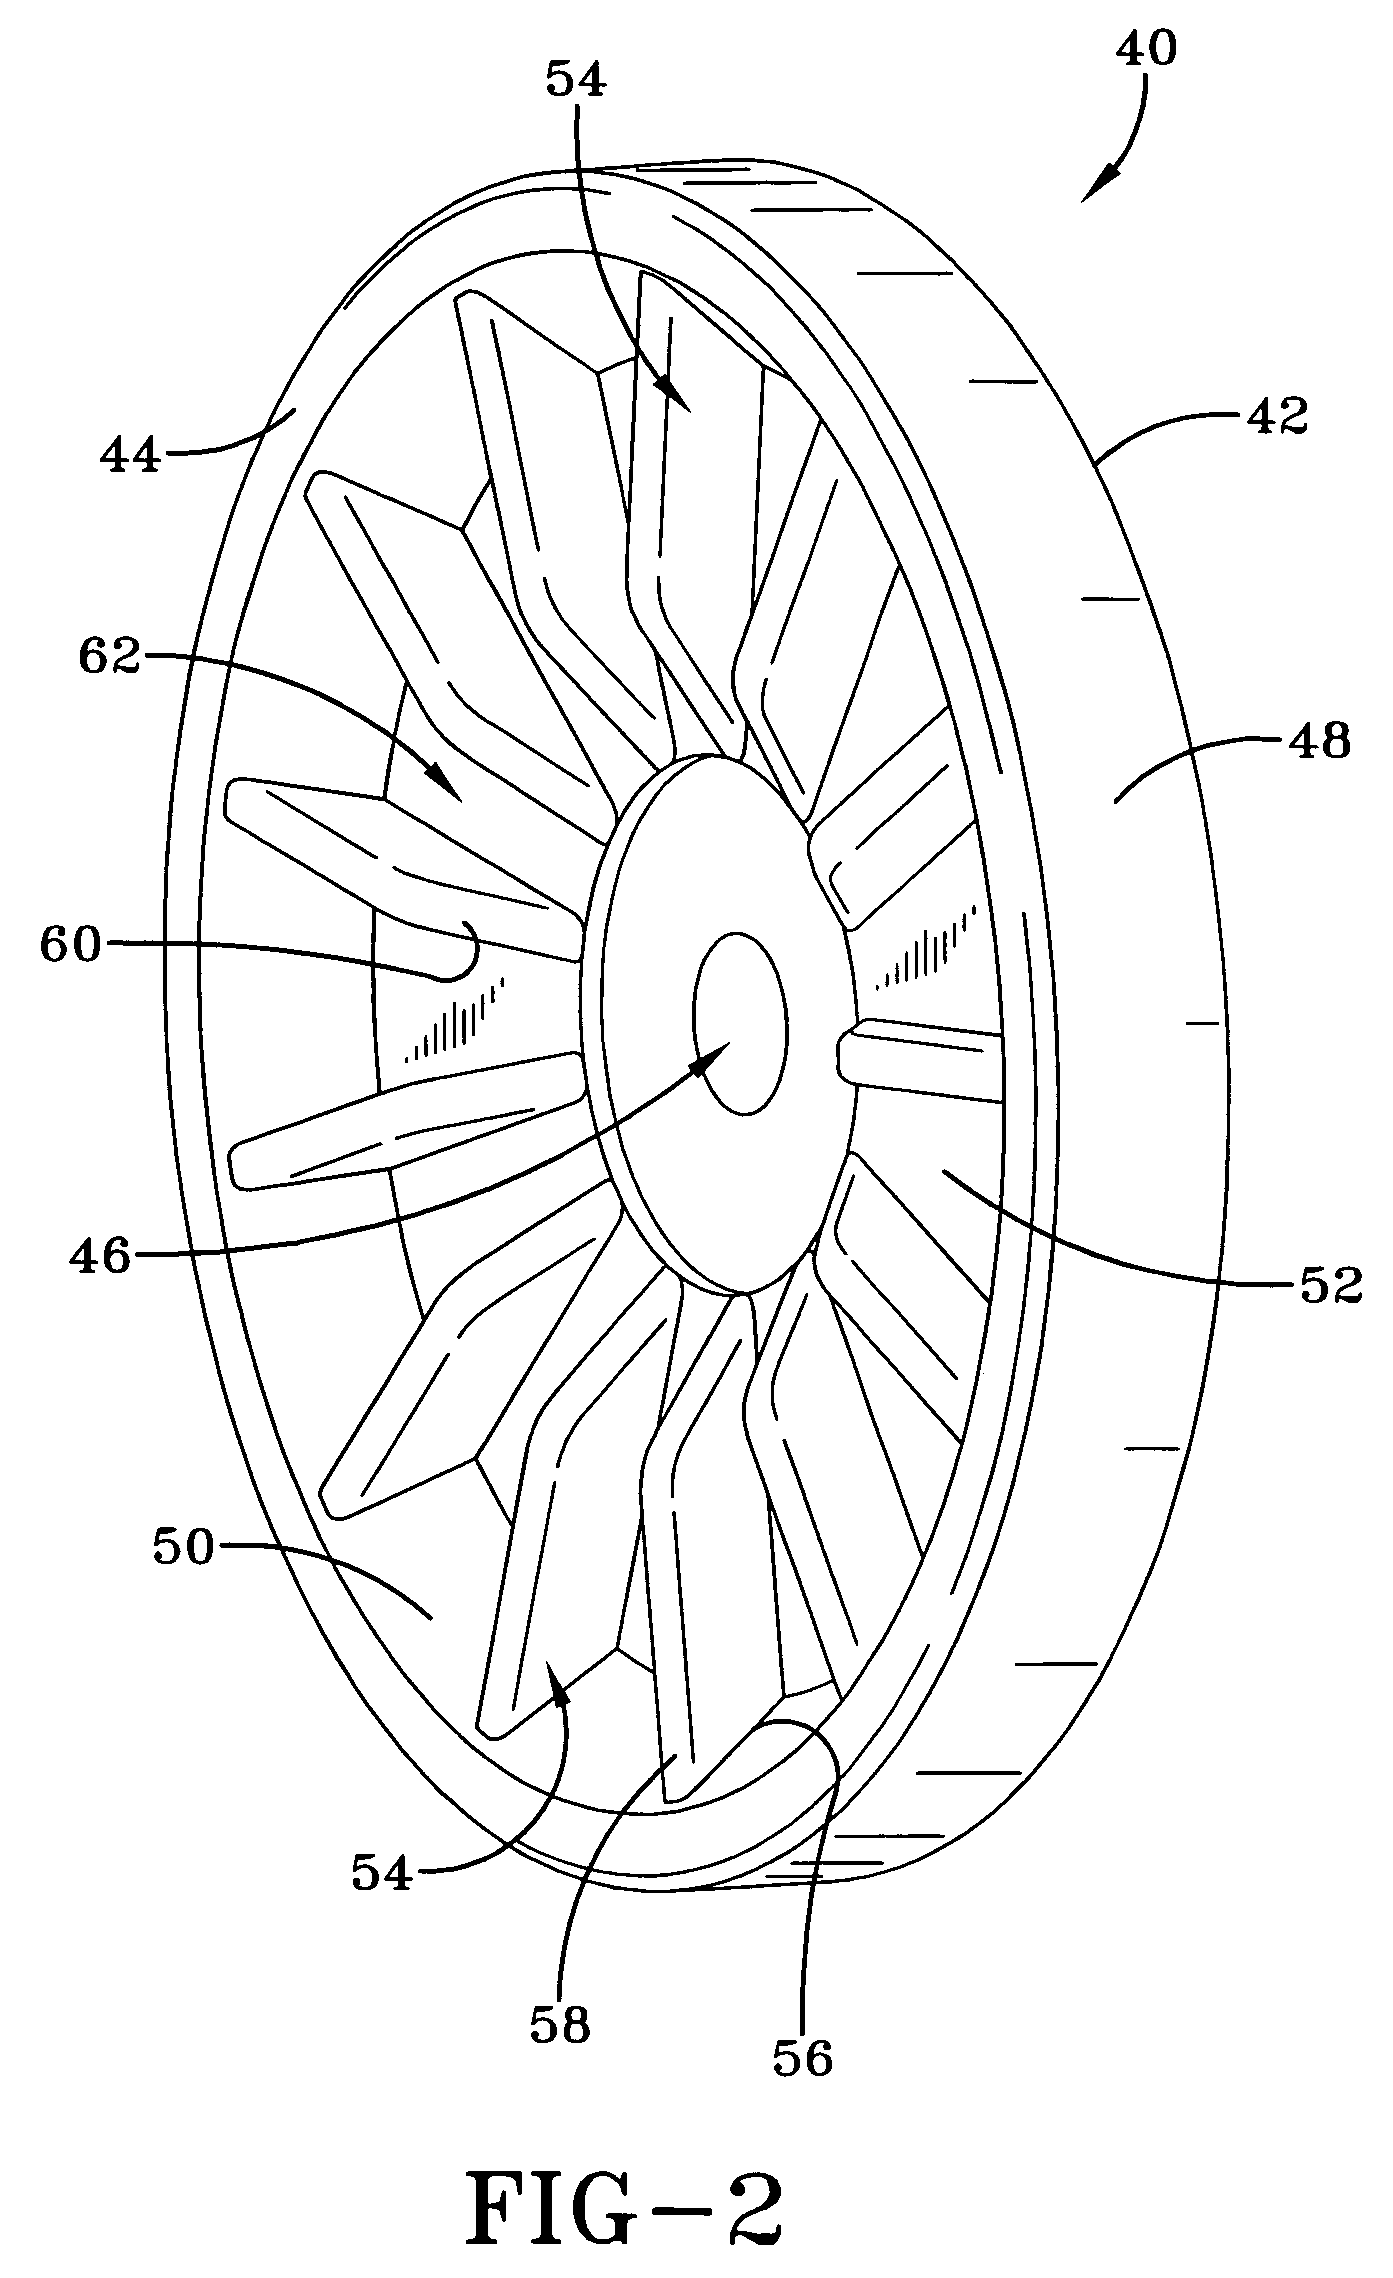 Motor/flywheel assembly with shrouded radial cooling fan